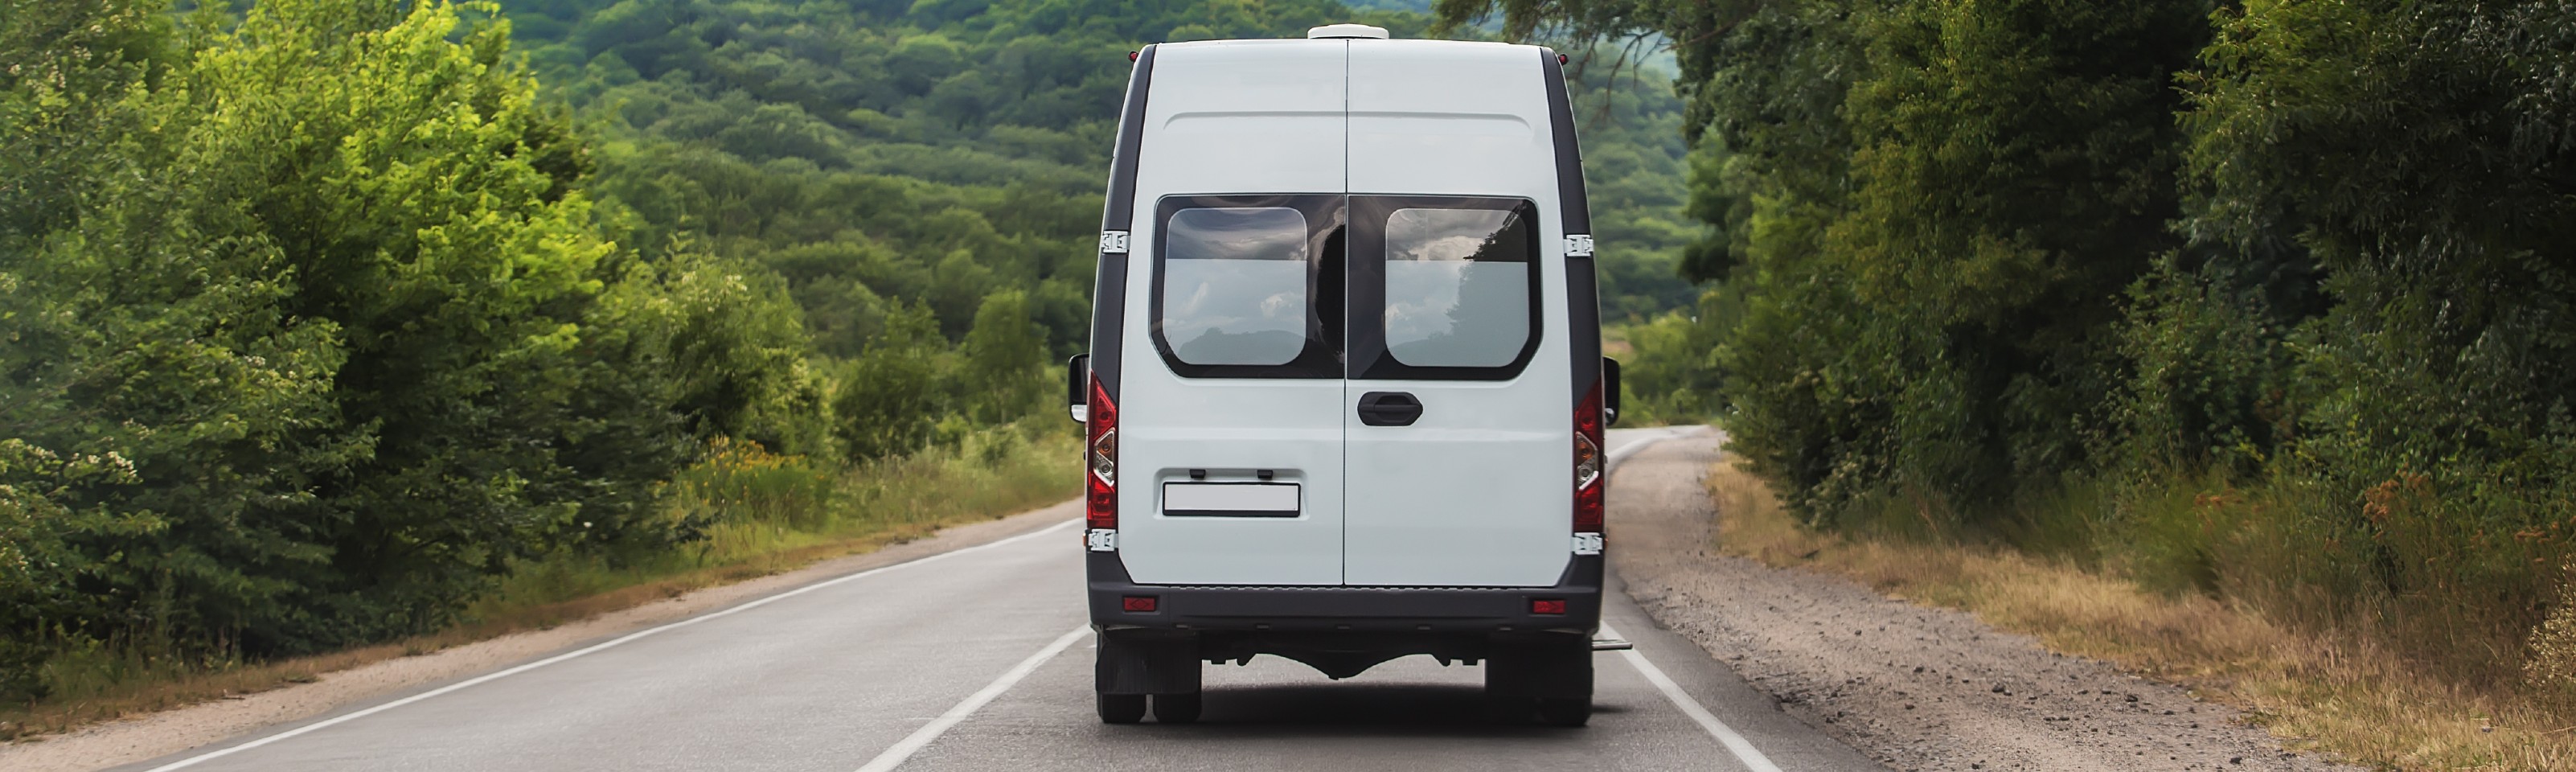 4 great reasons why you might need to hire a minibus this summer